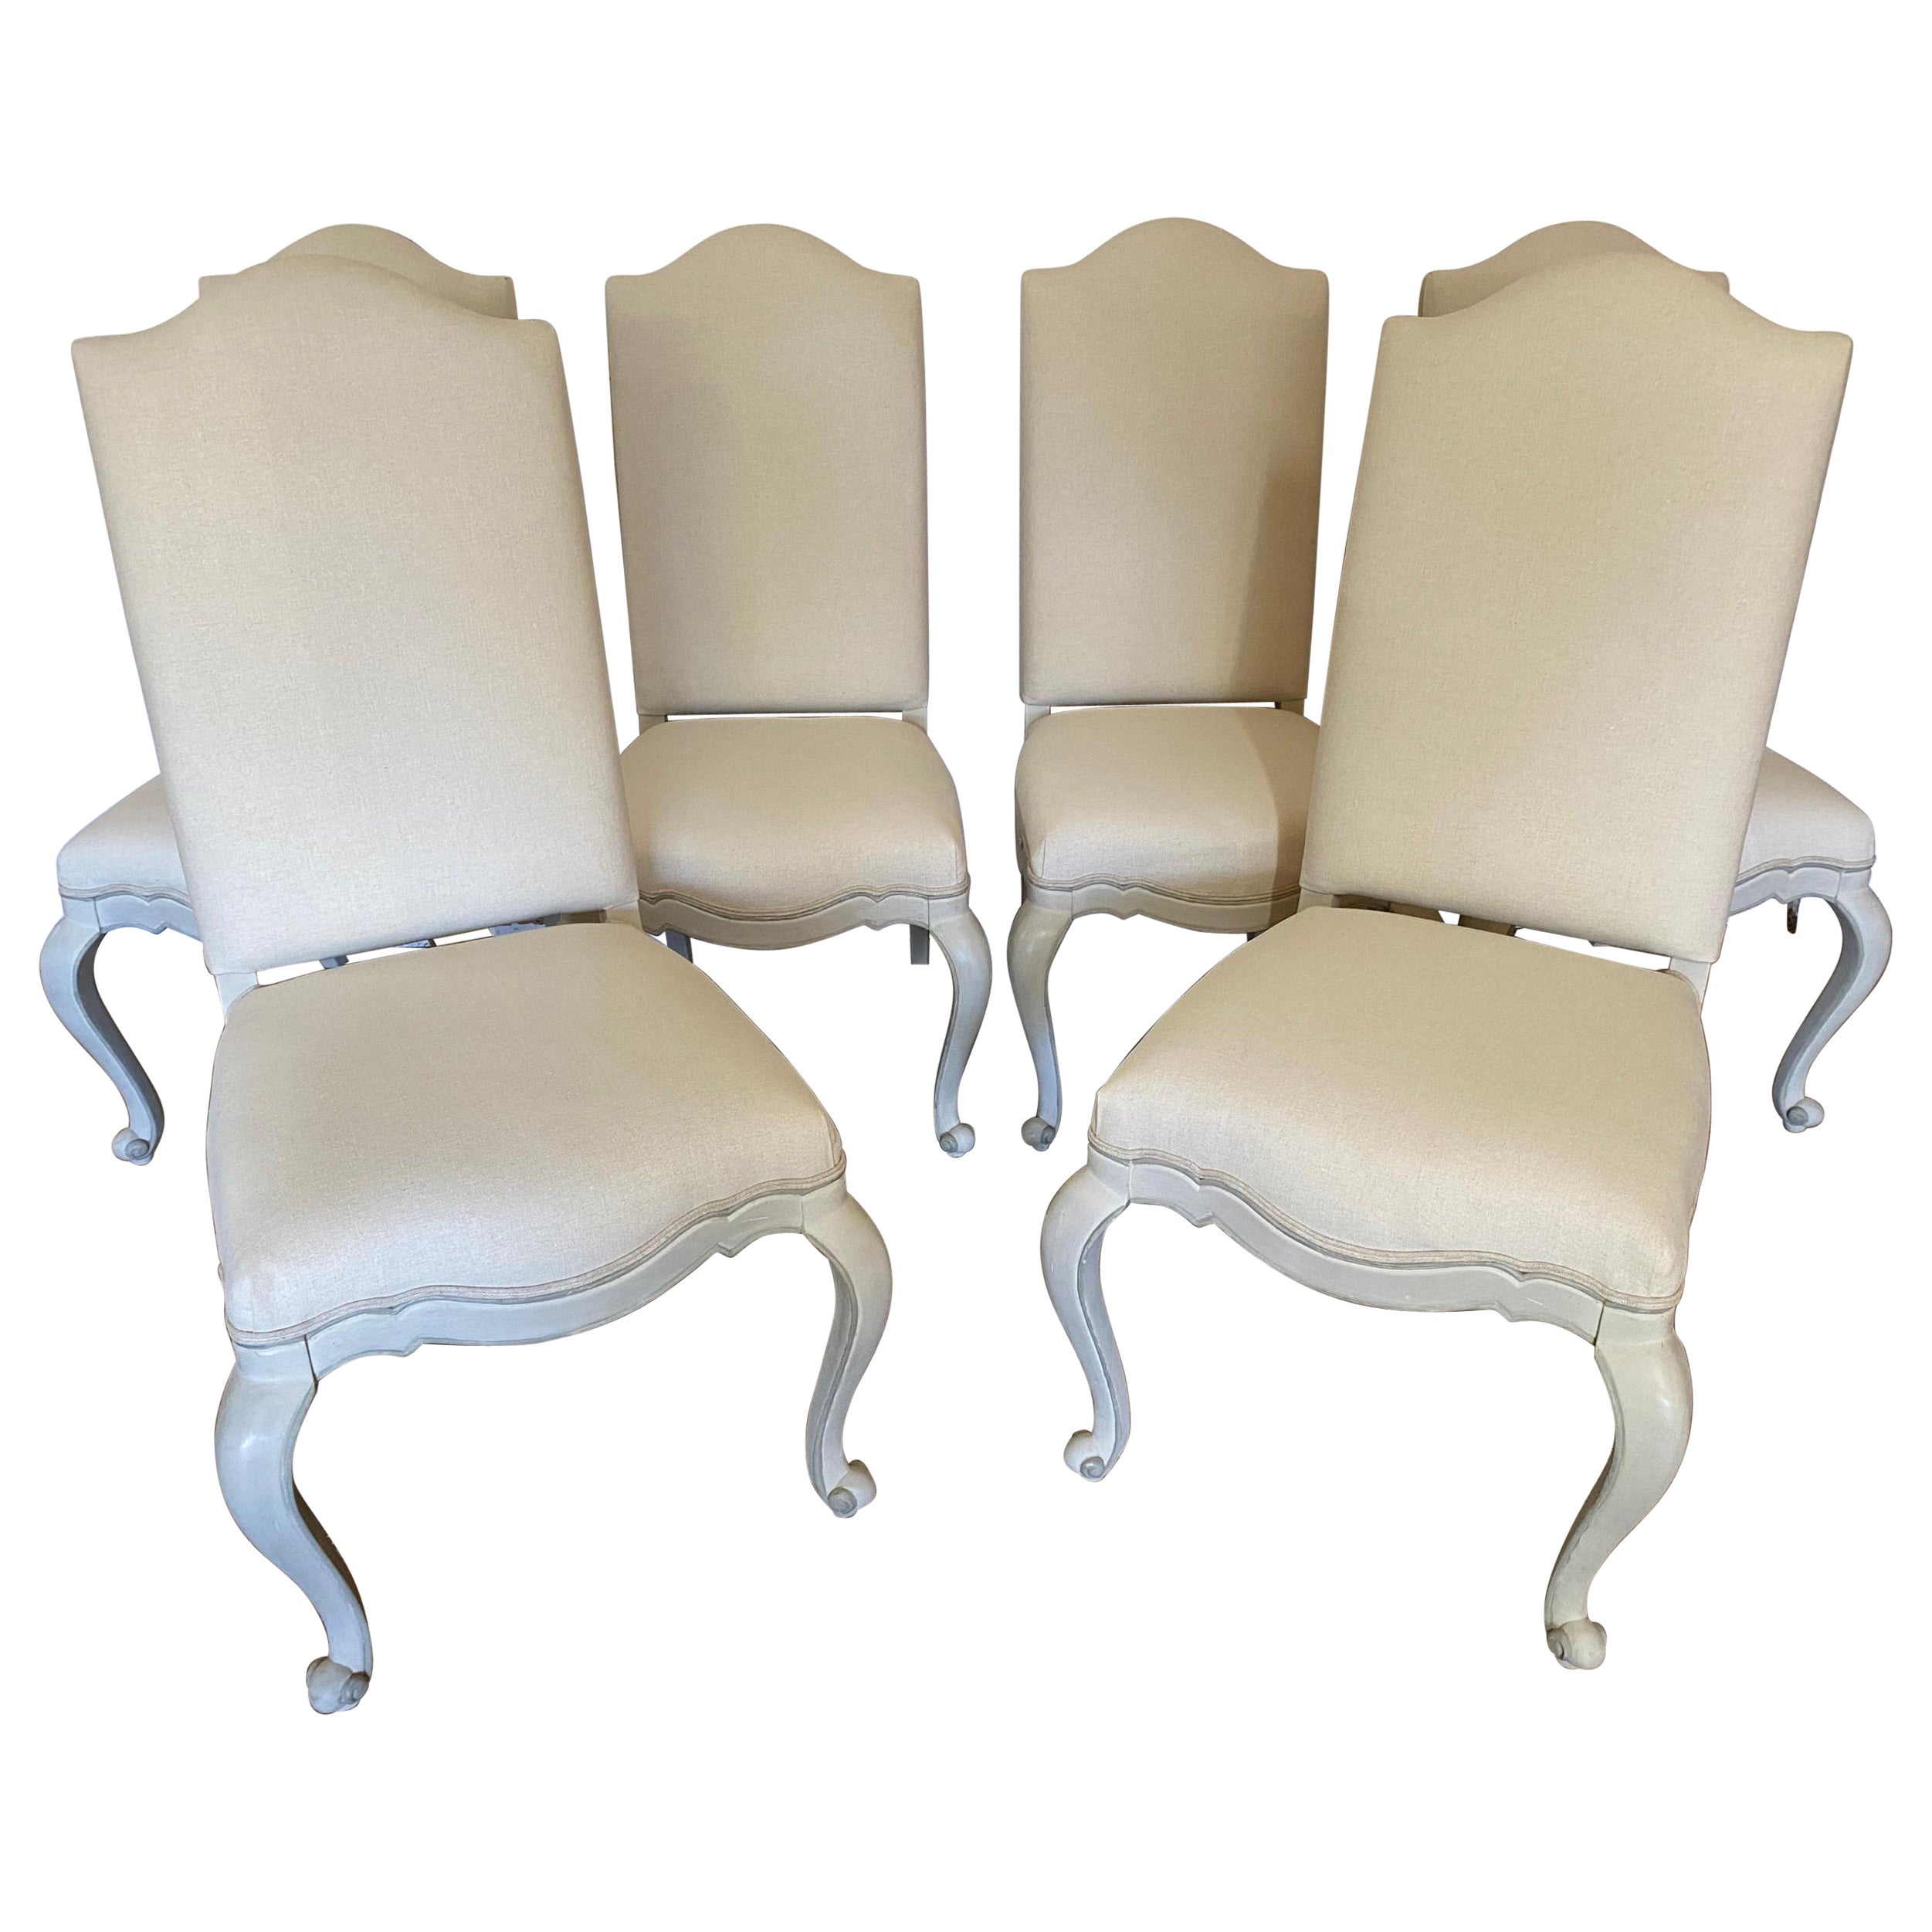 Set of 6 High Back French Country Provincial Style Upholstered Dining Chairs